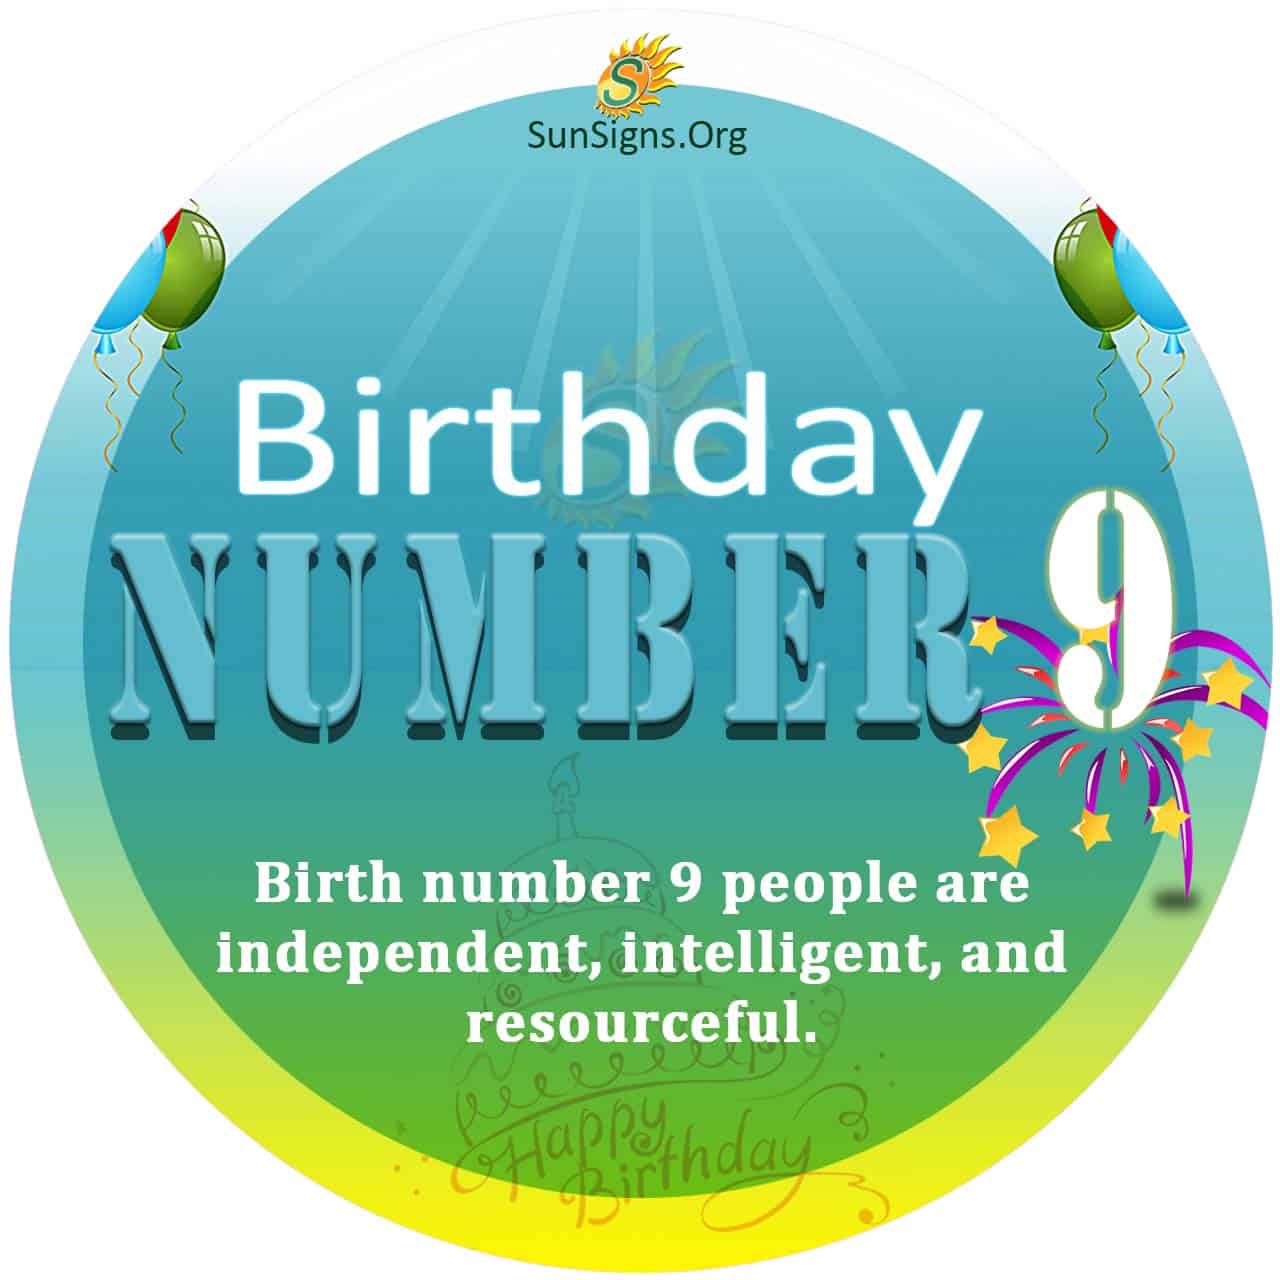 birthday-number-9-born-on-the-9th-day-of-the-month-sunsigns-org